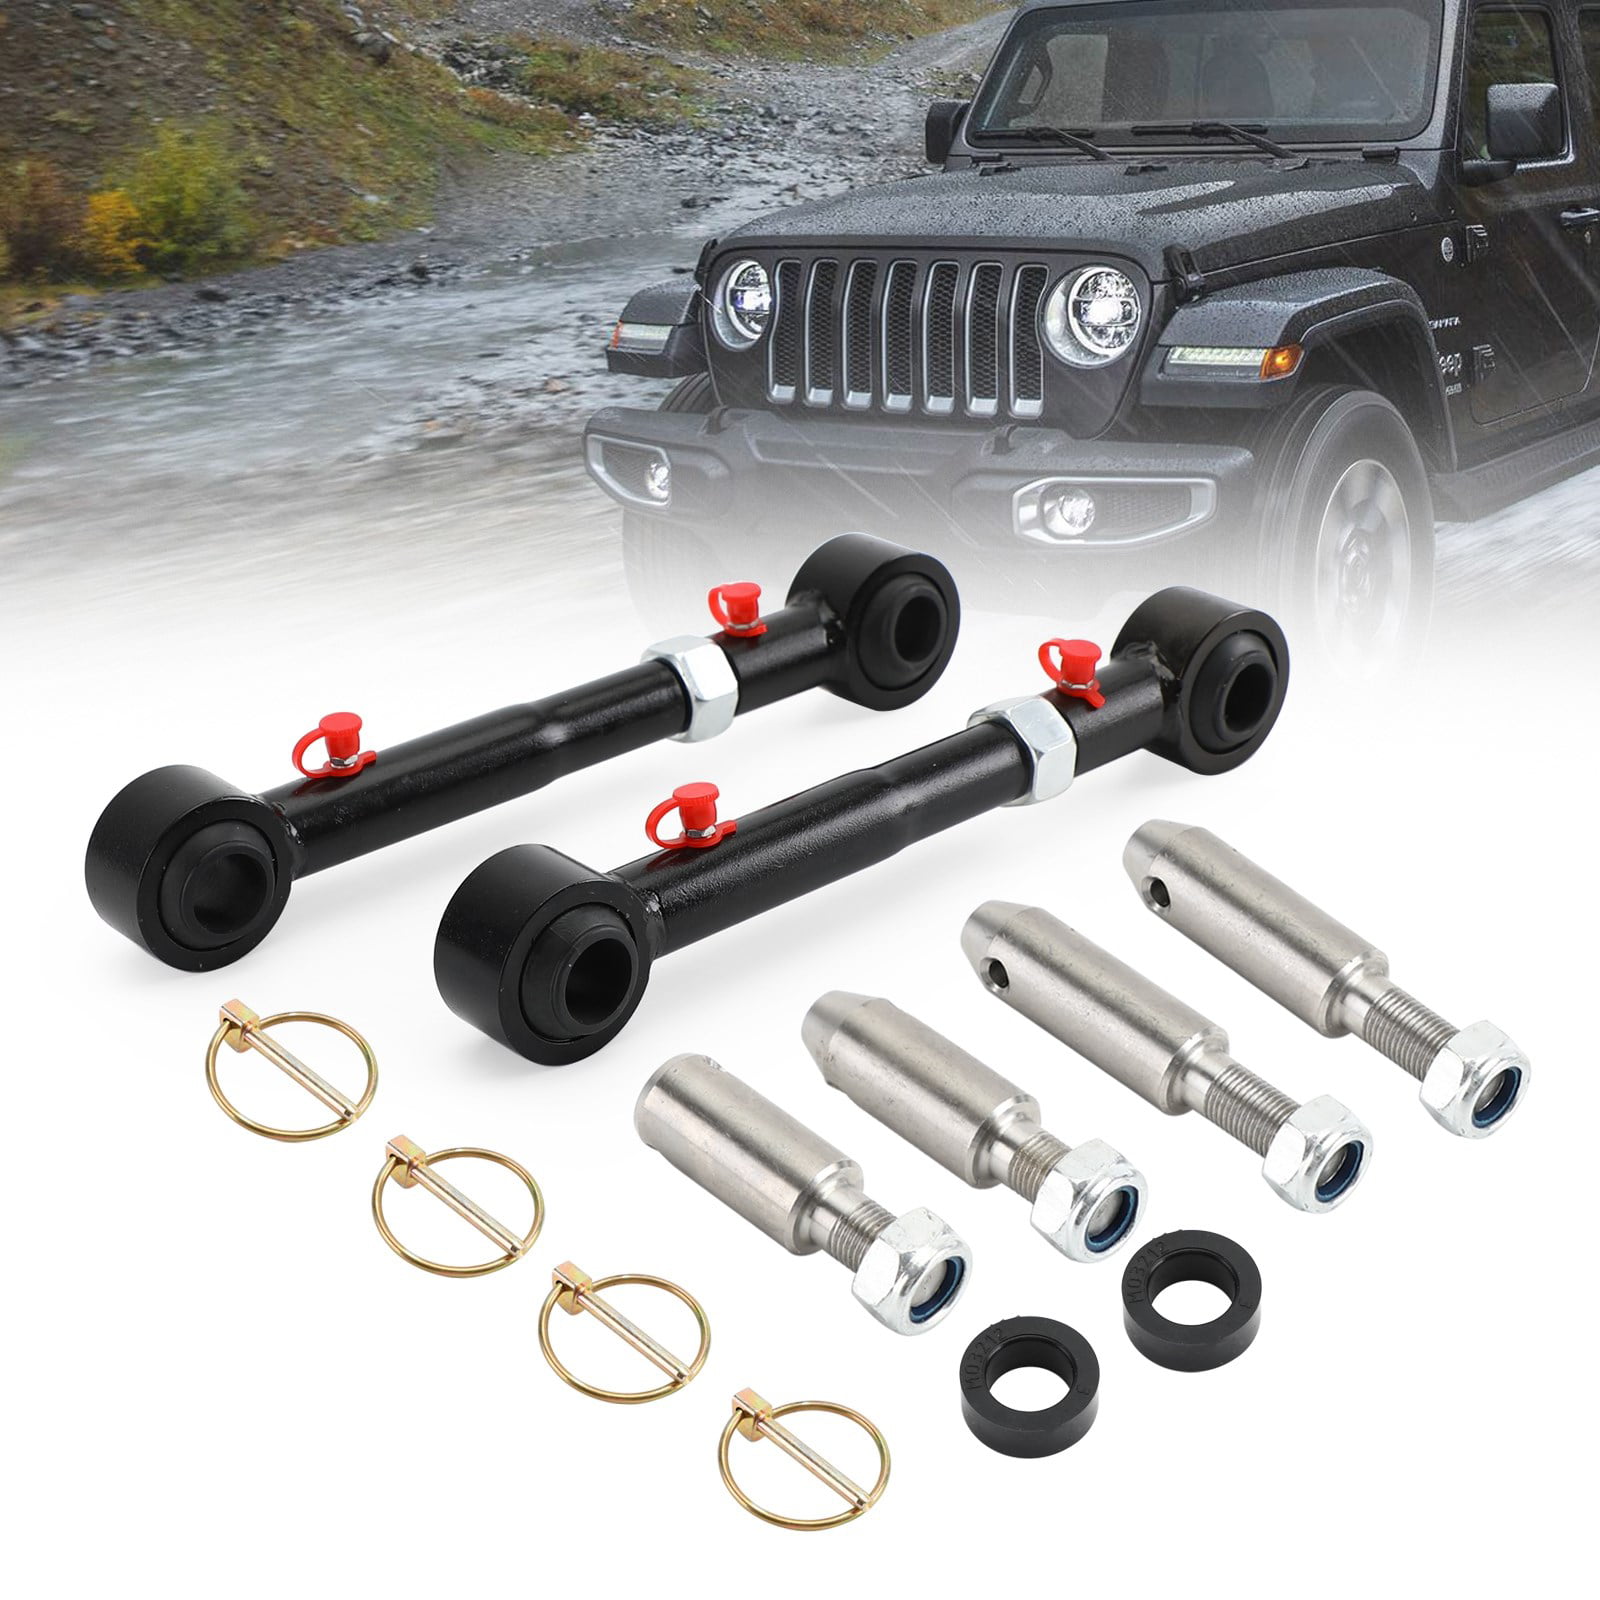 Buy Front Sway Bar Links Disconnect For 2007-2021 Jeep Wrangler JK JL  ”Lift Online at Lowest Price in Ubuy Algeria. 453185270